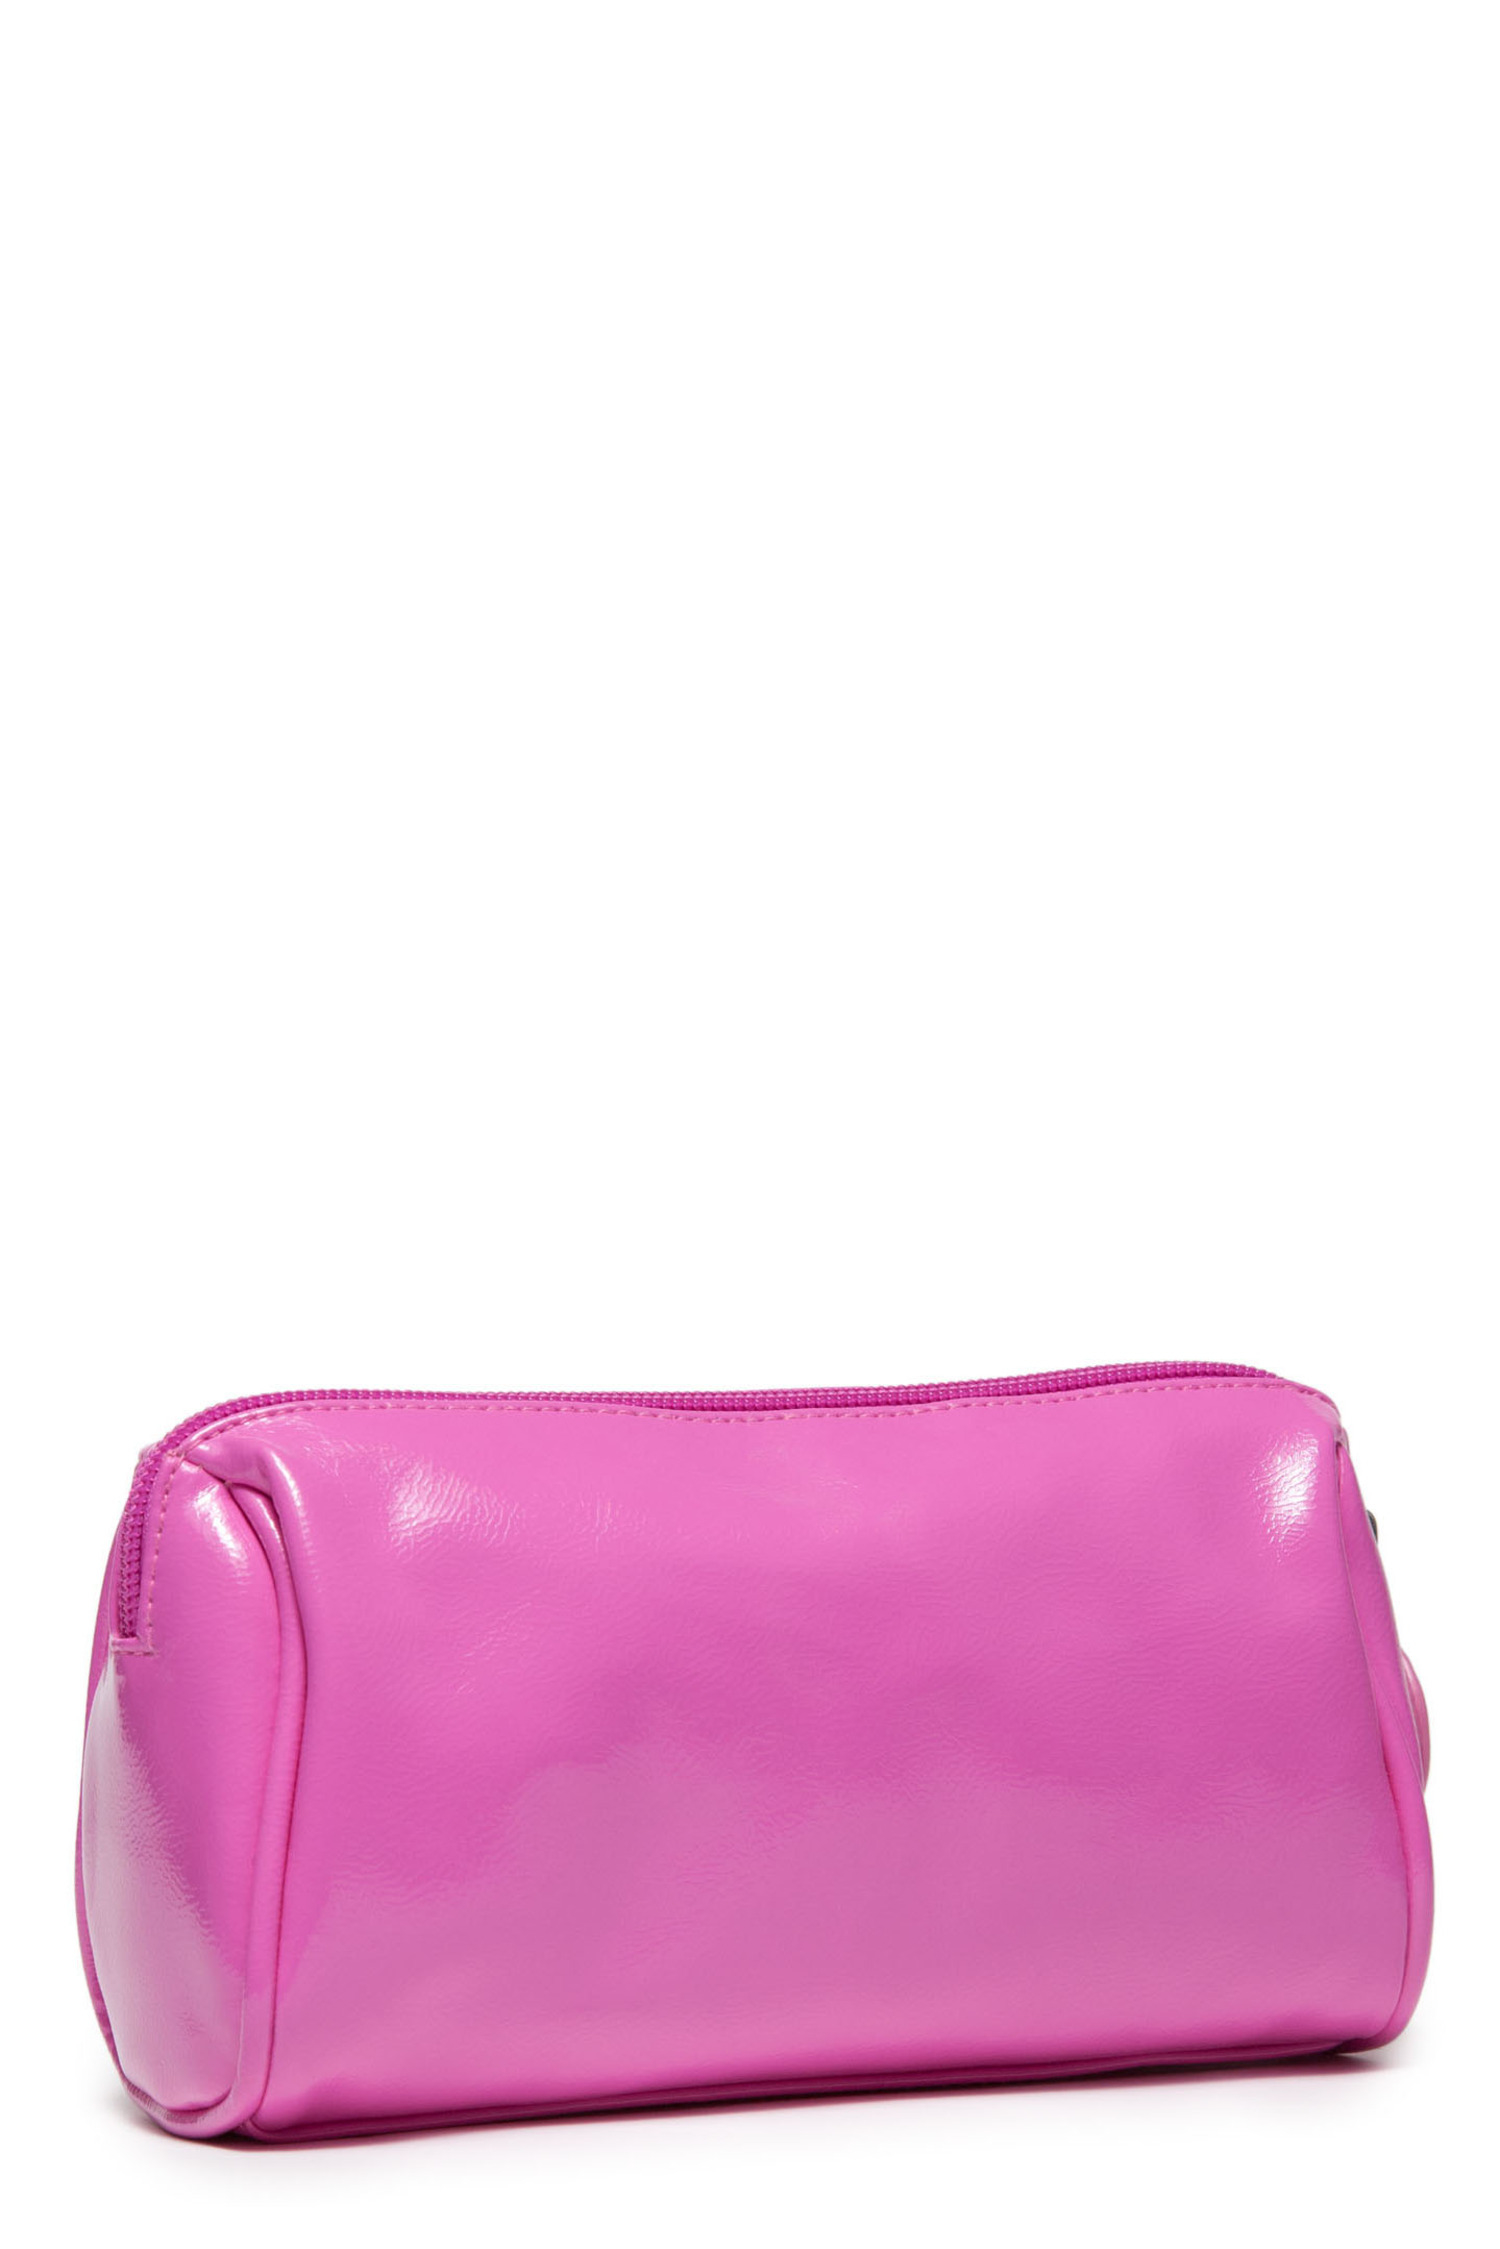 Lisa perry Small Cosmetic Bag in Pink | Lyst